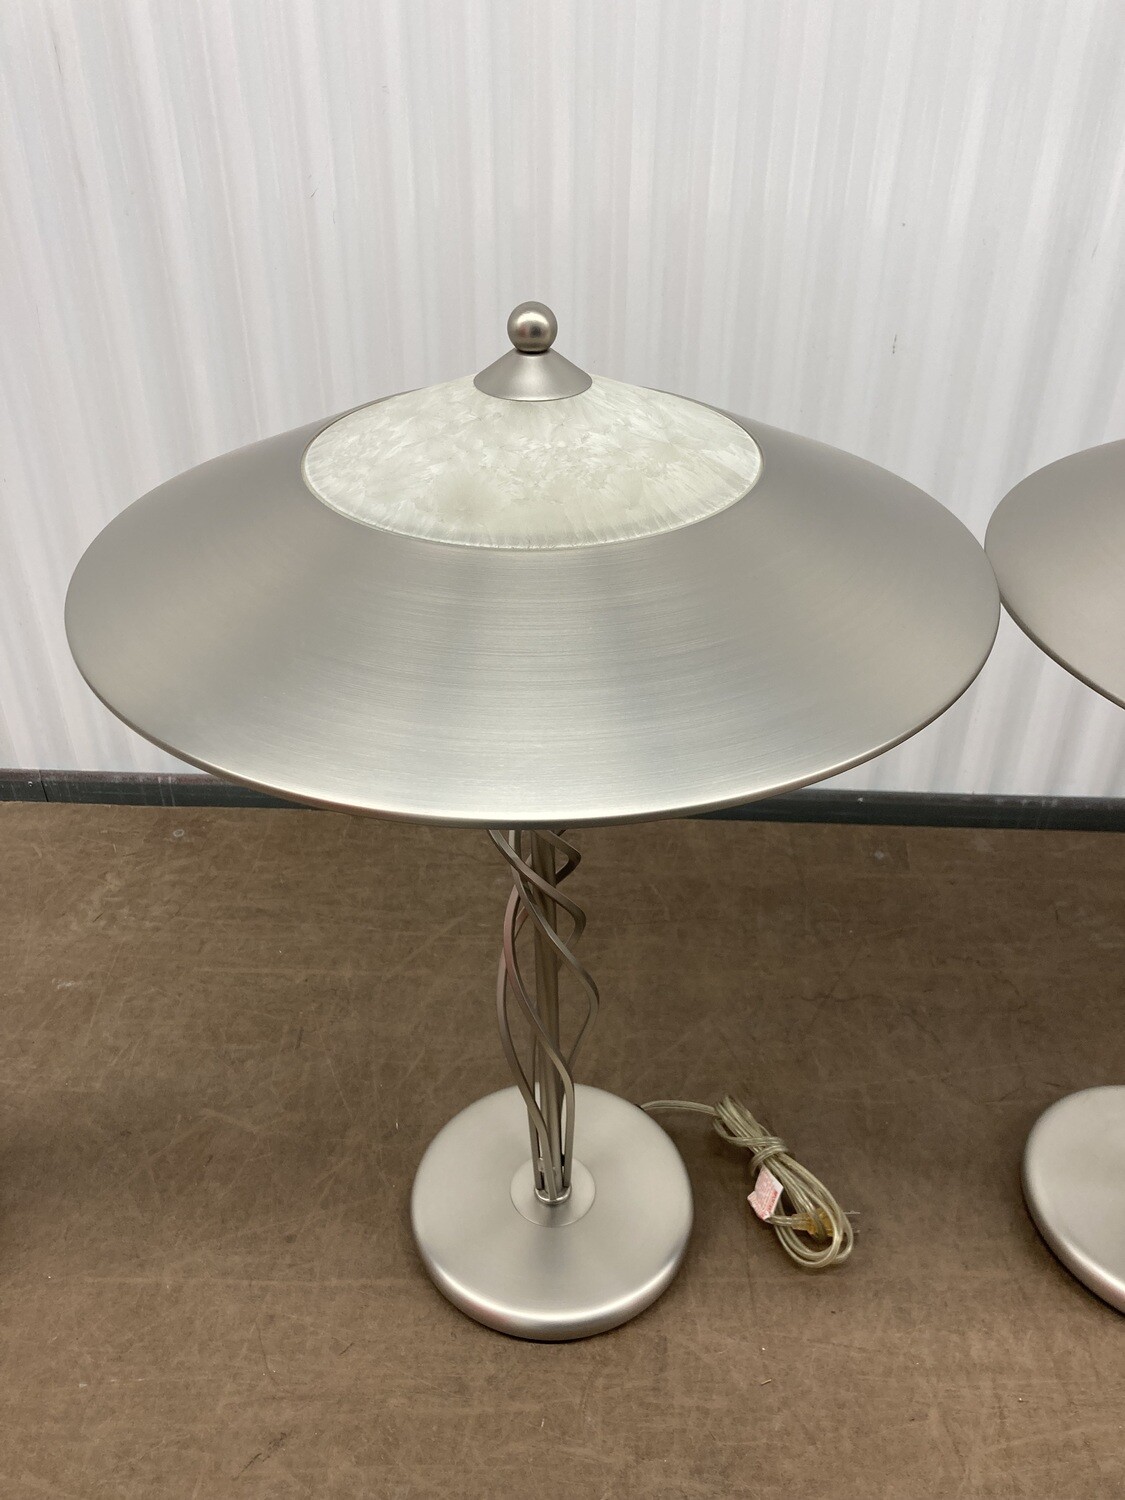 Modern Metal Lamp with frosted glass #2314 ** 8 mos. to sell, clearance